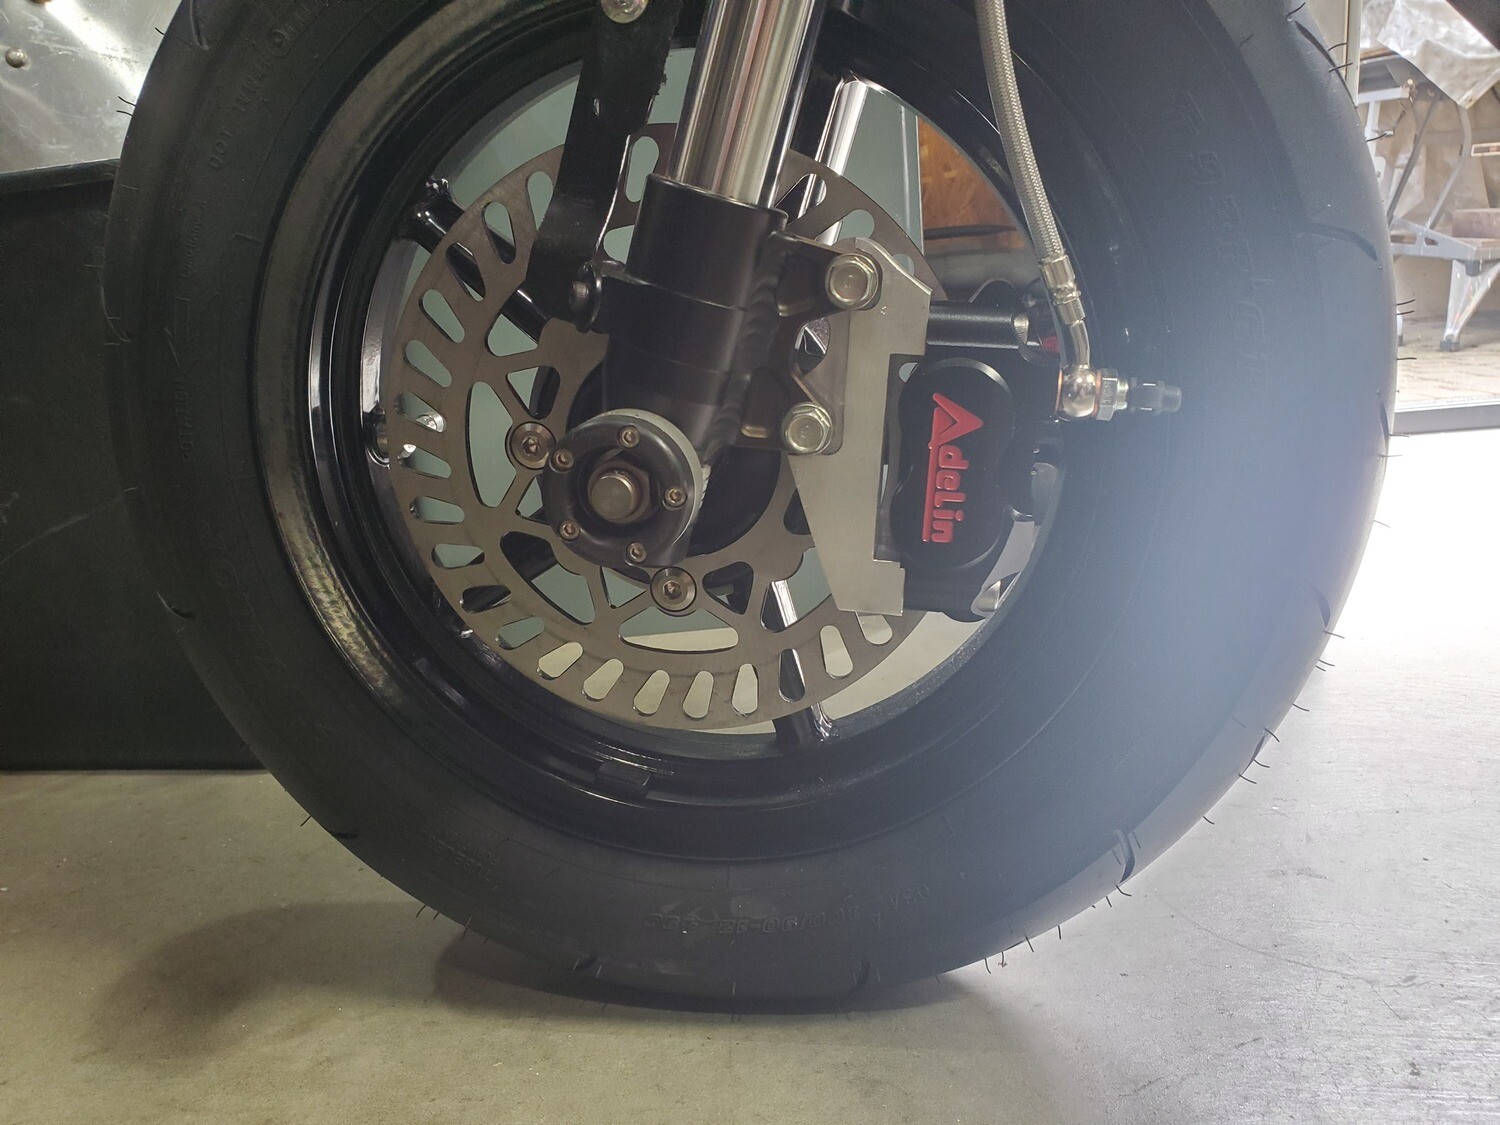 KAYO - SVRP Sets of Black MiniGP Wheels for MR150R : 2.5Front and 3.0 Rear - Light Weight